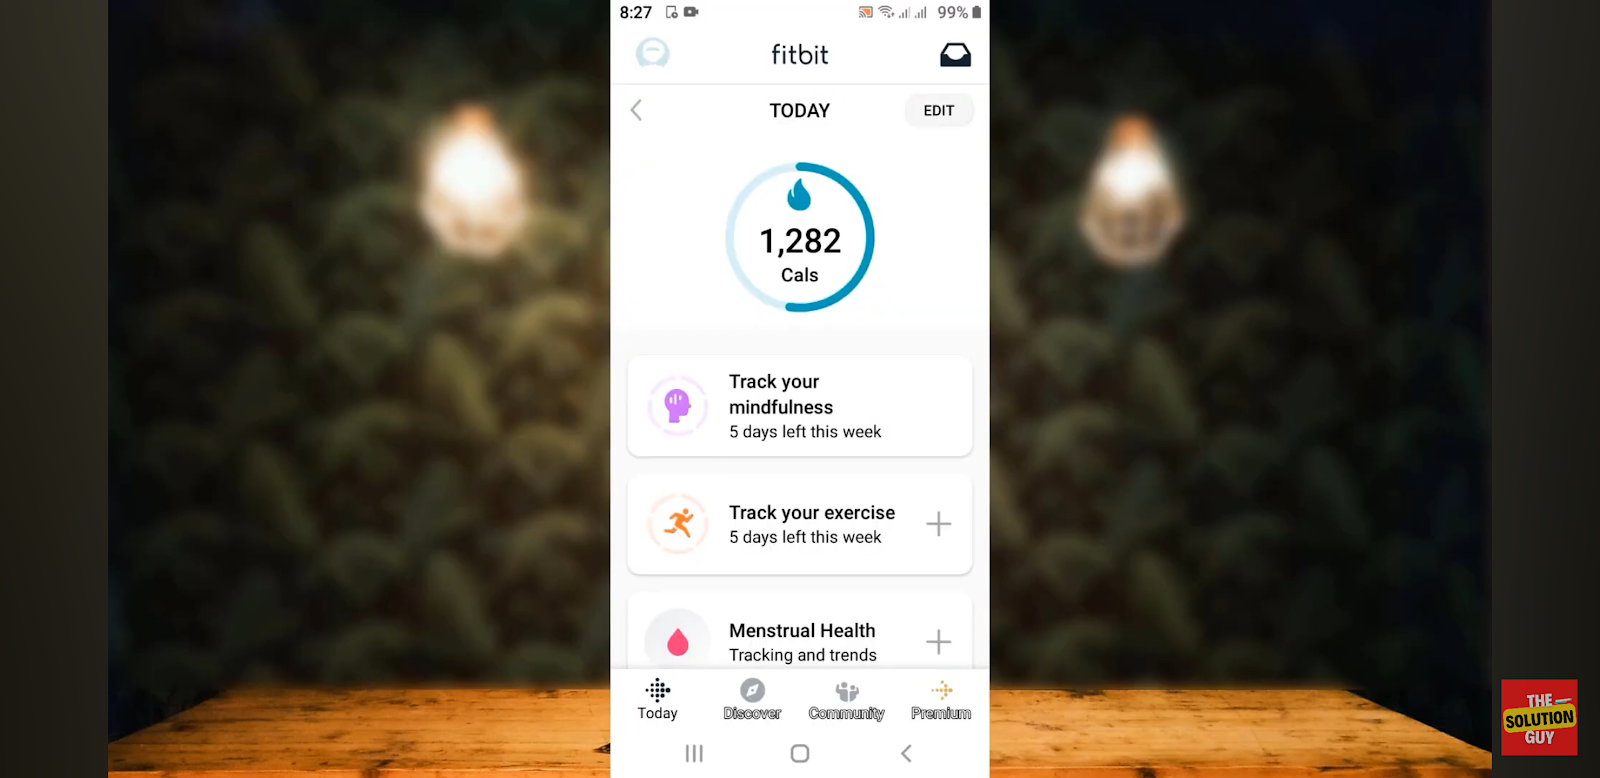 Remove Email from Fitbit Account login